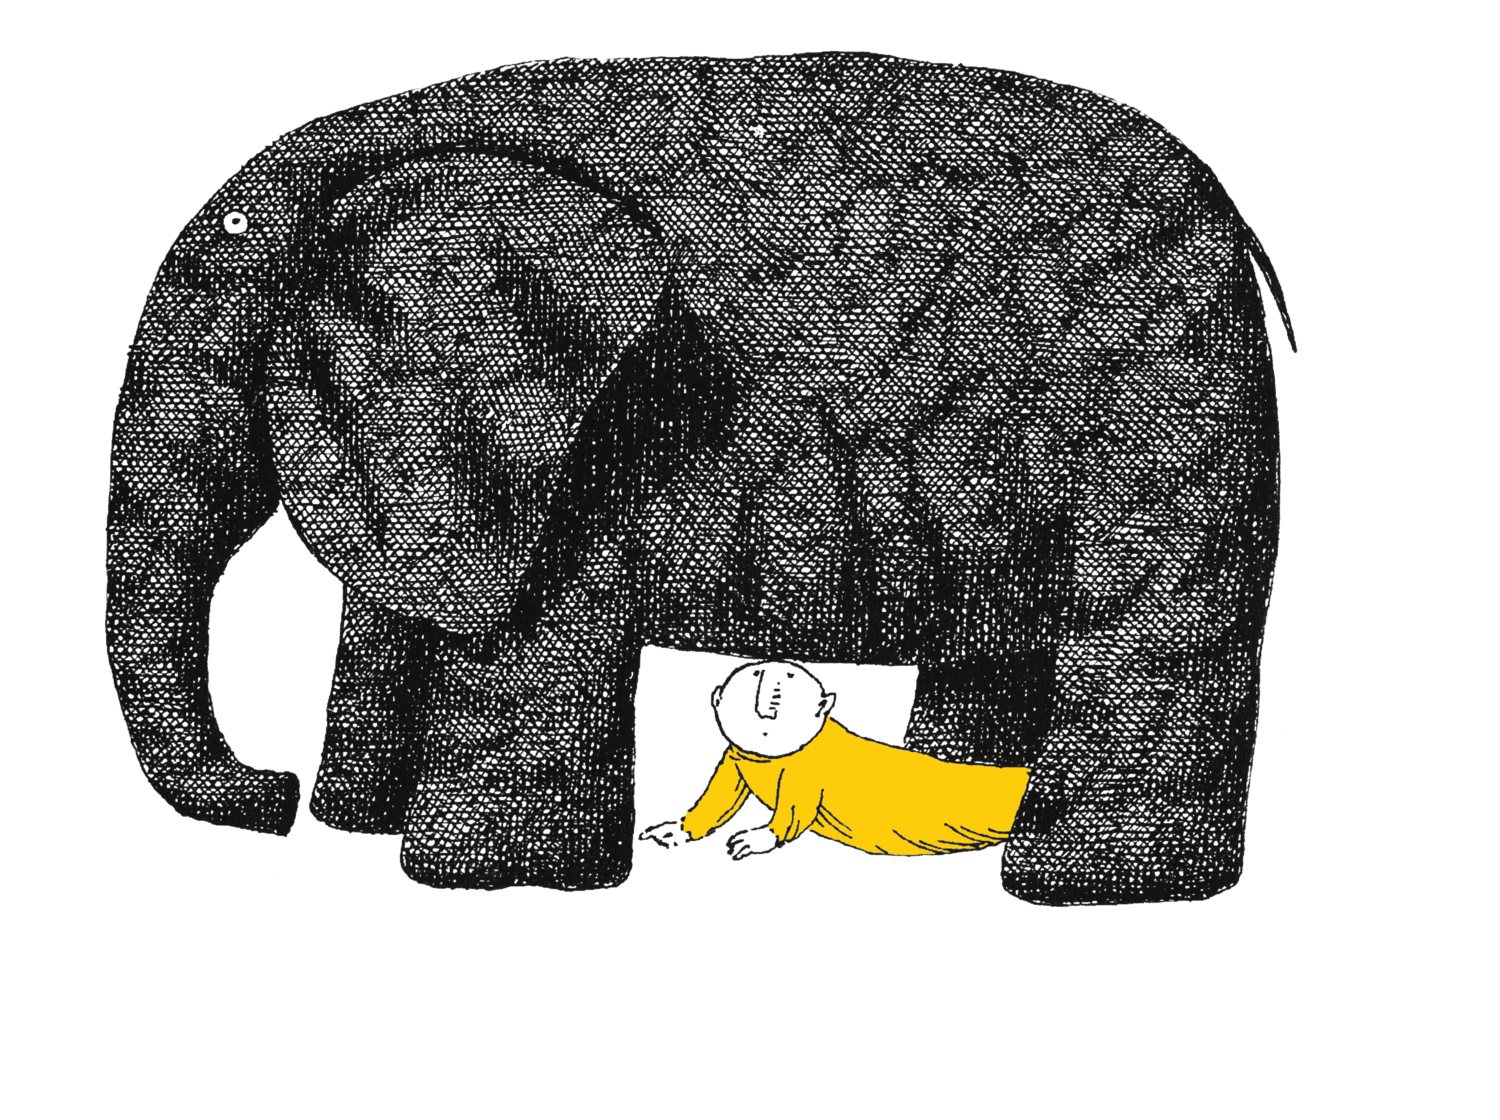 picture of an elephant and a boy in yellow clothing